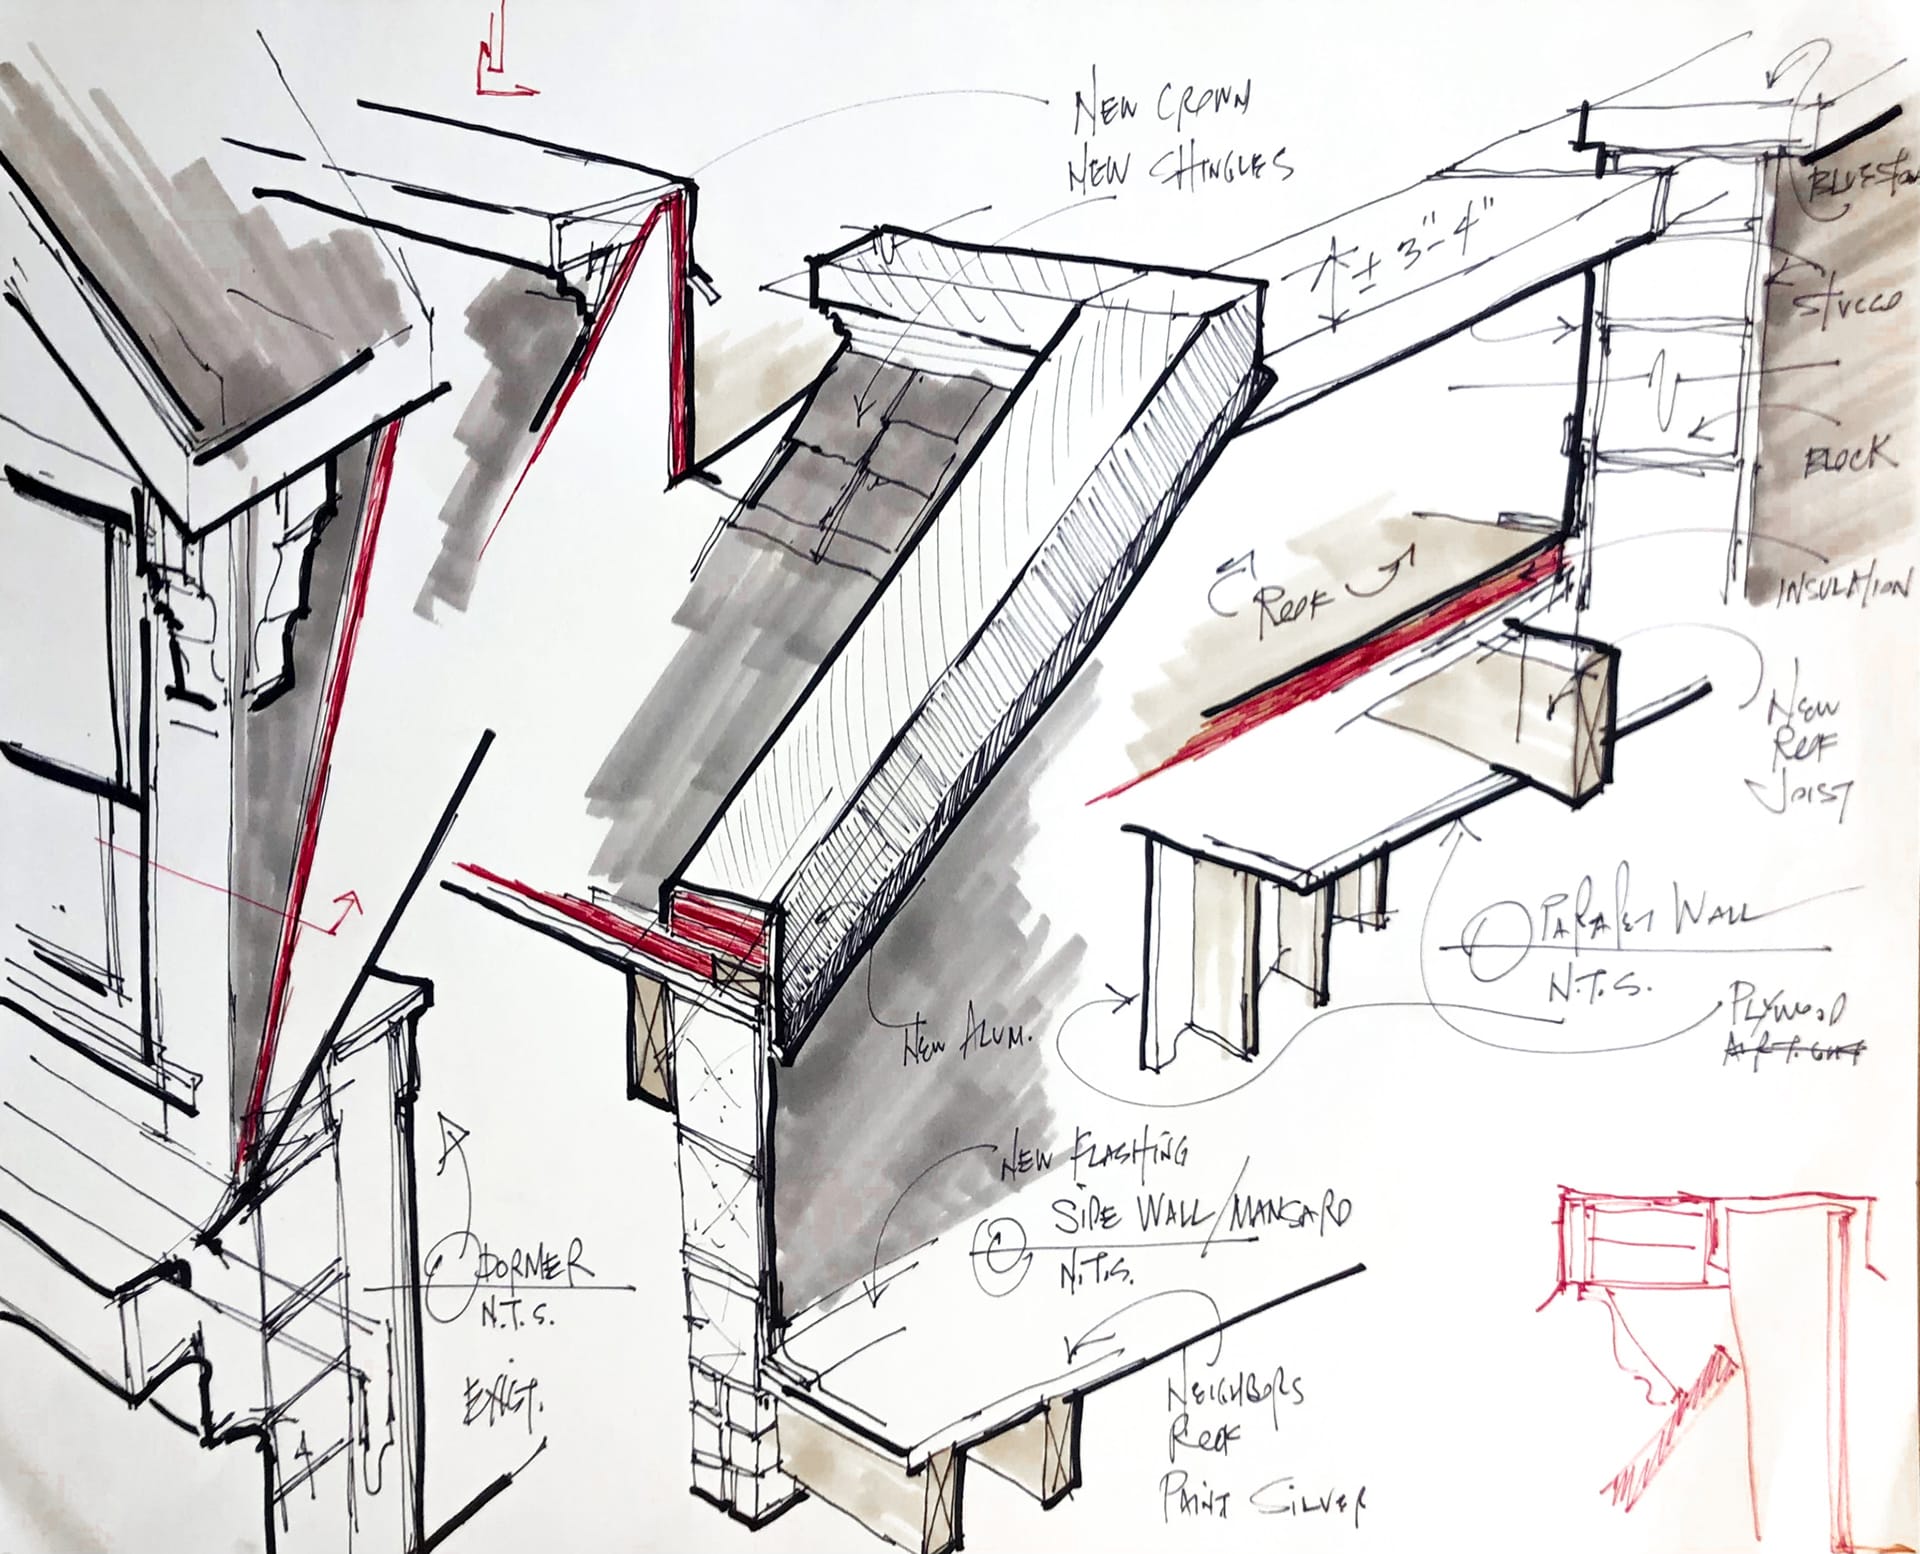 Sketch of preliminary designs and details of a Carroll Gardens townhome addition